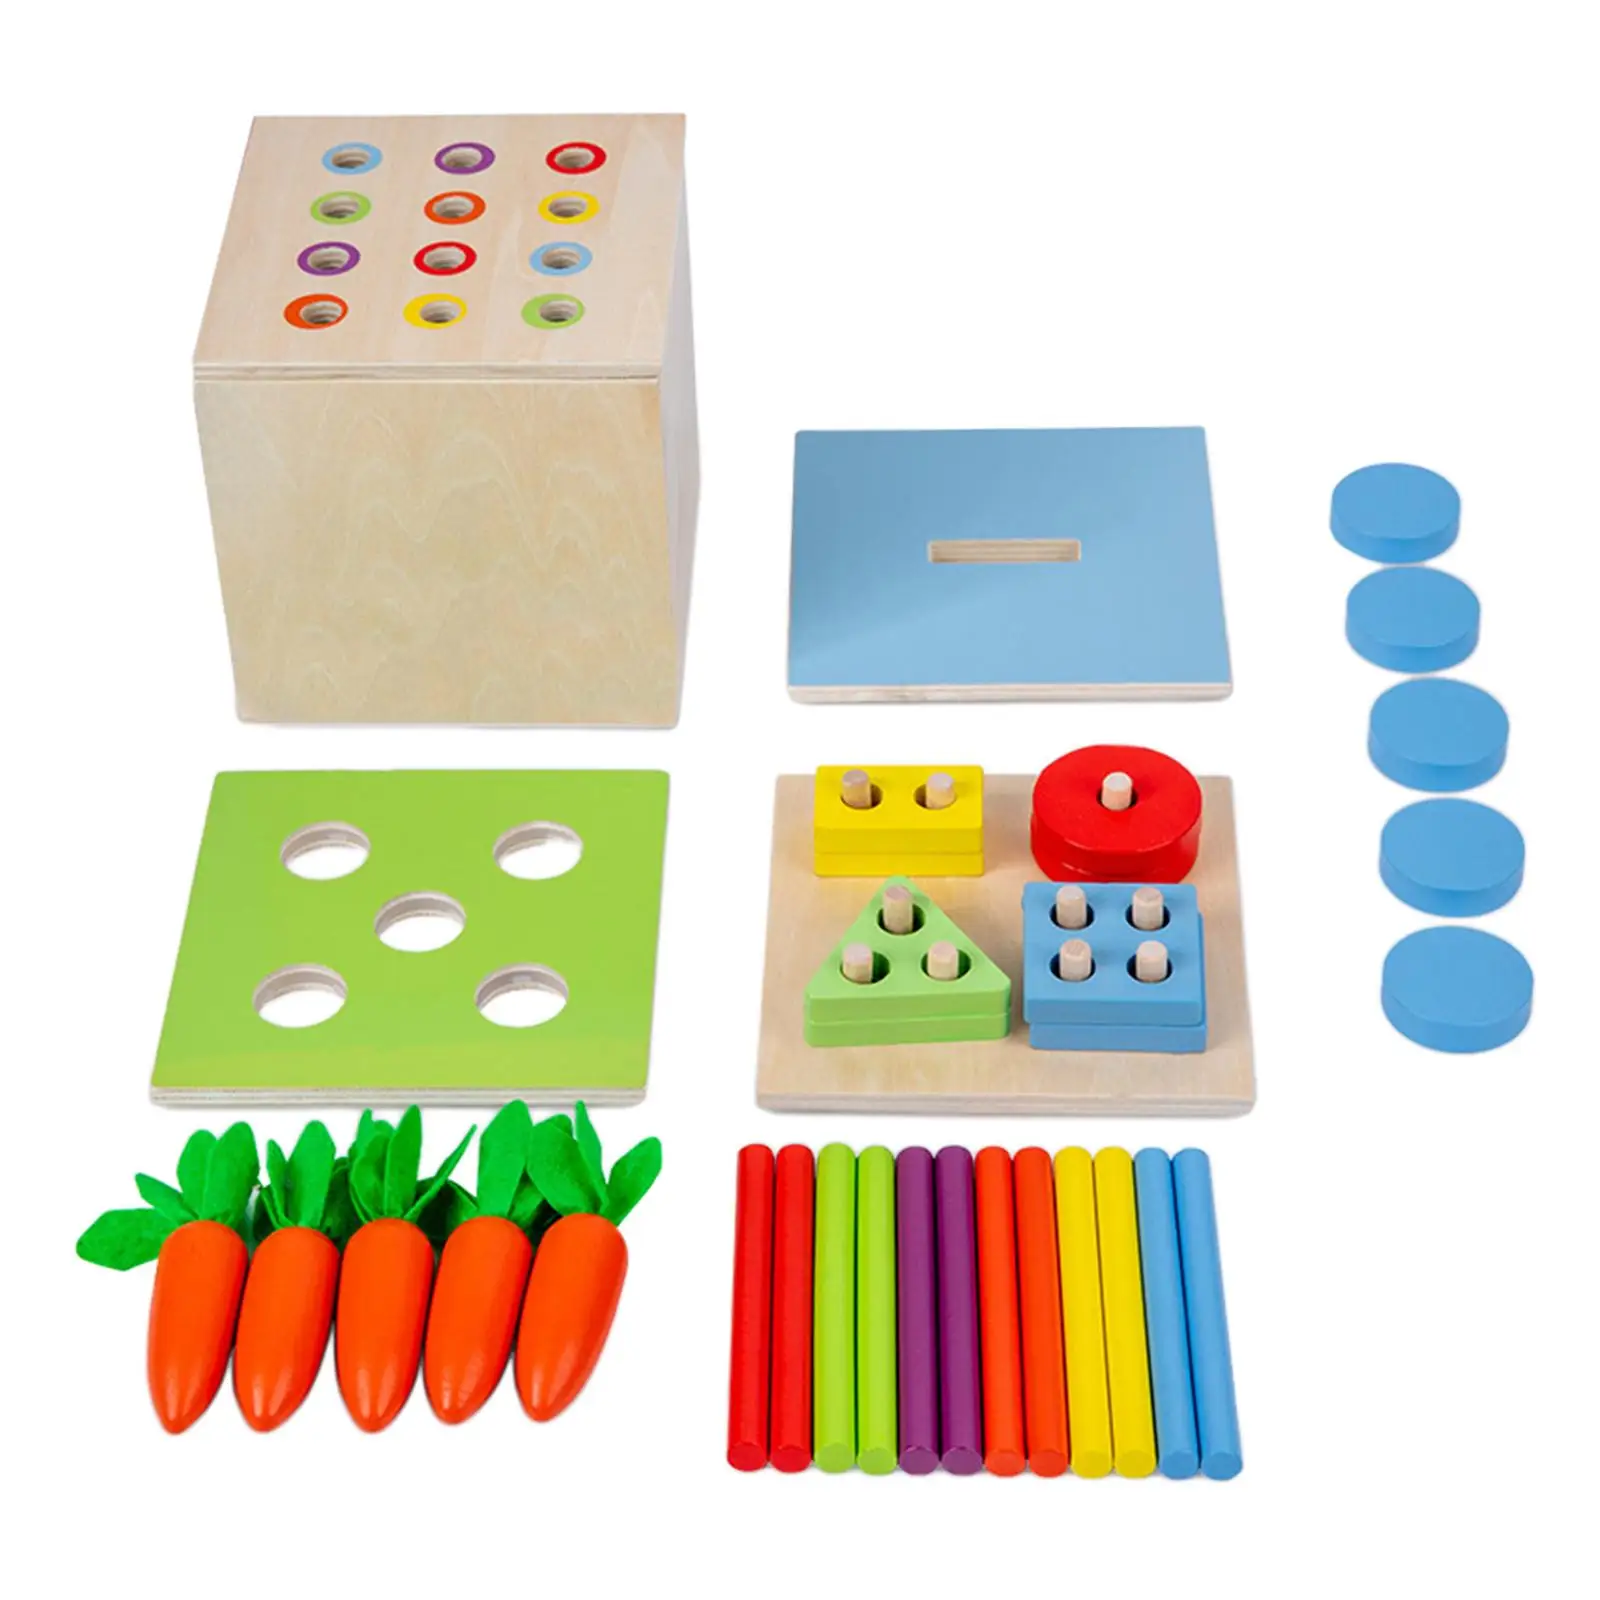 Object Permanence Box Carrot Harvest Toy Matchstick Color Drop Game Color Recognition Coin Drop Game for Preschool Boys Girls